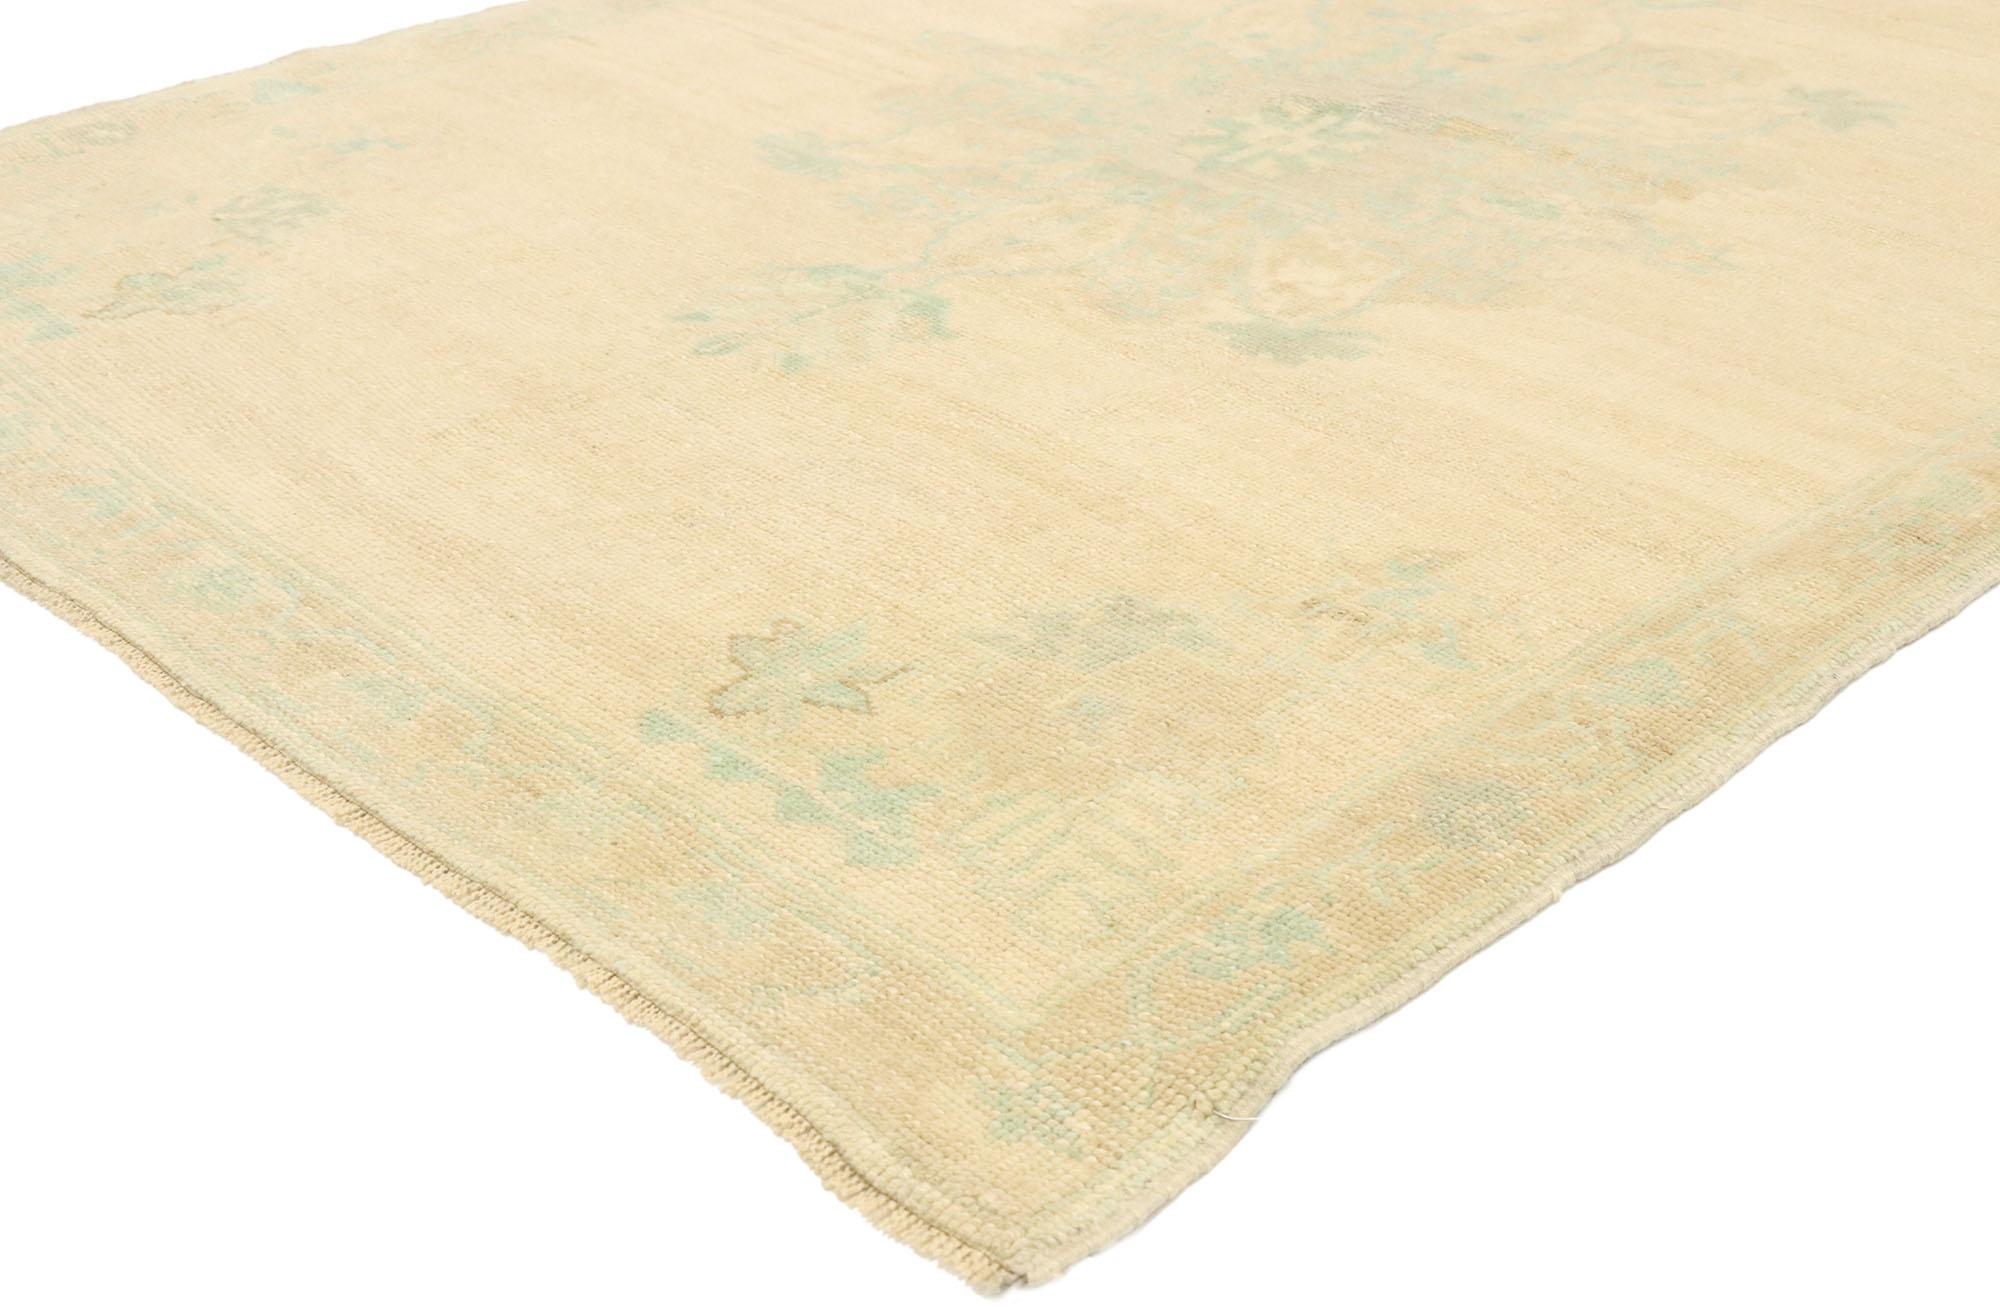 52969 Vintage Turkish Oushak rug with Romantic Georgian French Cottage Style 04'01 x 06'02. Showcasing effortless beauty and soft, bespoke vibes, this hand knotted wool vintage Turkish Oushak rug beautifully embodies Romantic Georgian French cottage